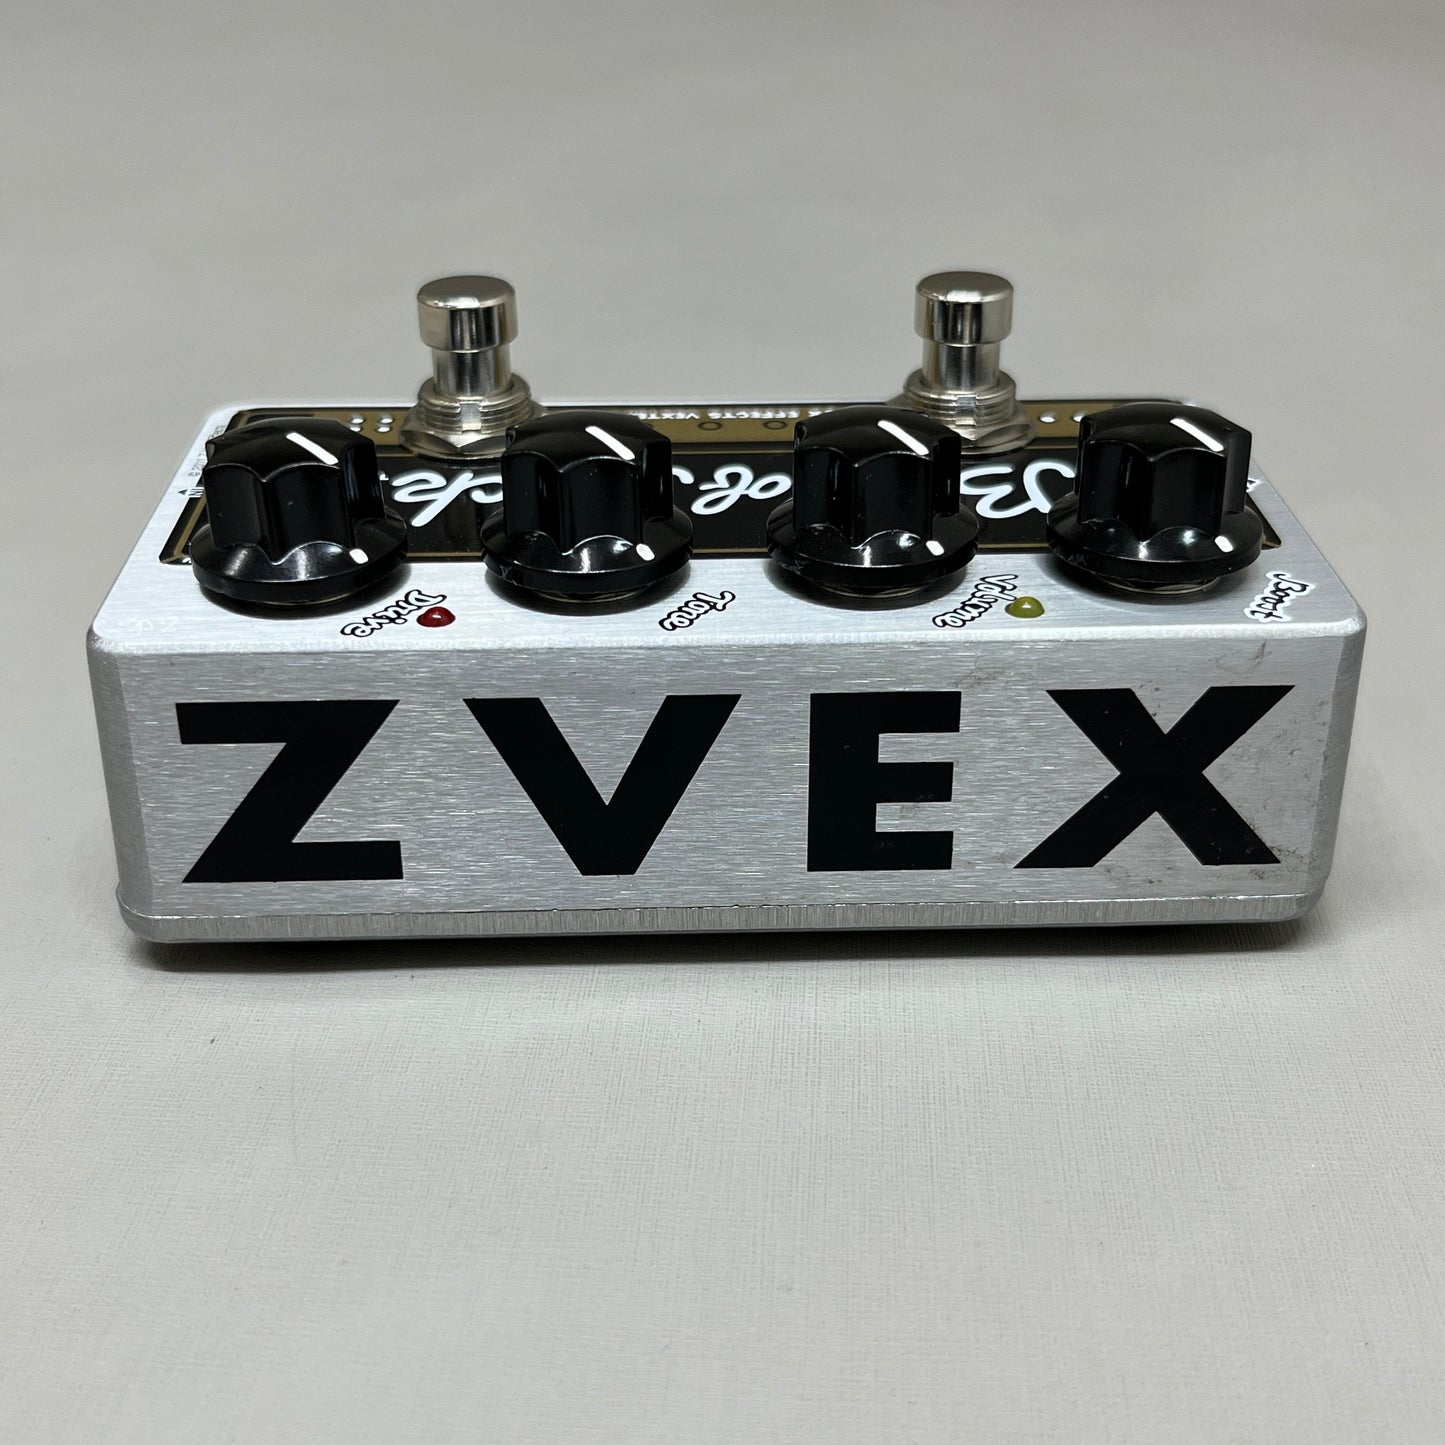 ZVEX Guitar AMP Vexter Box of Rock Guitar Effects Pedal 5.7" x 3.4" x 3.3" Silver BR19616 (New)